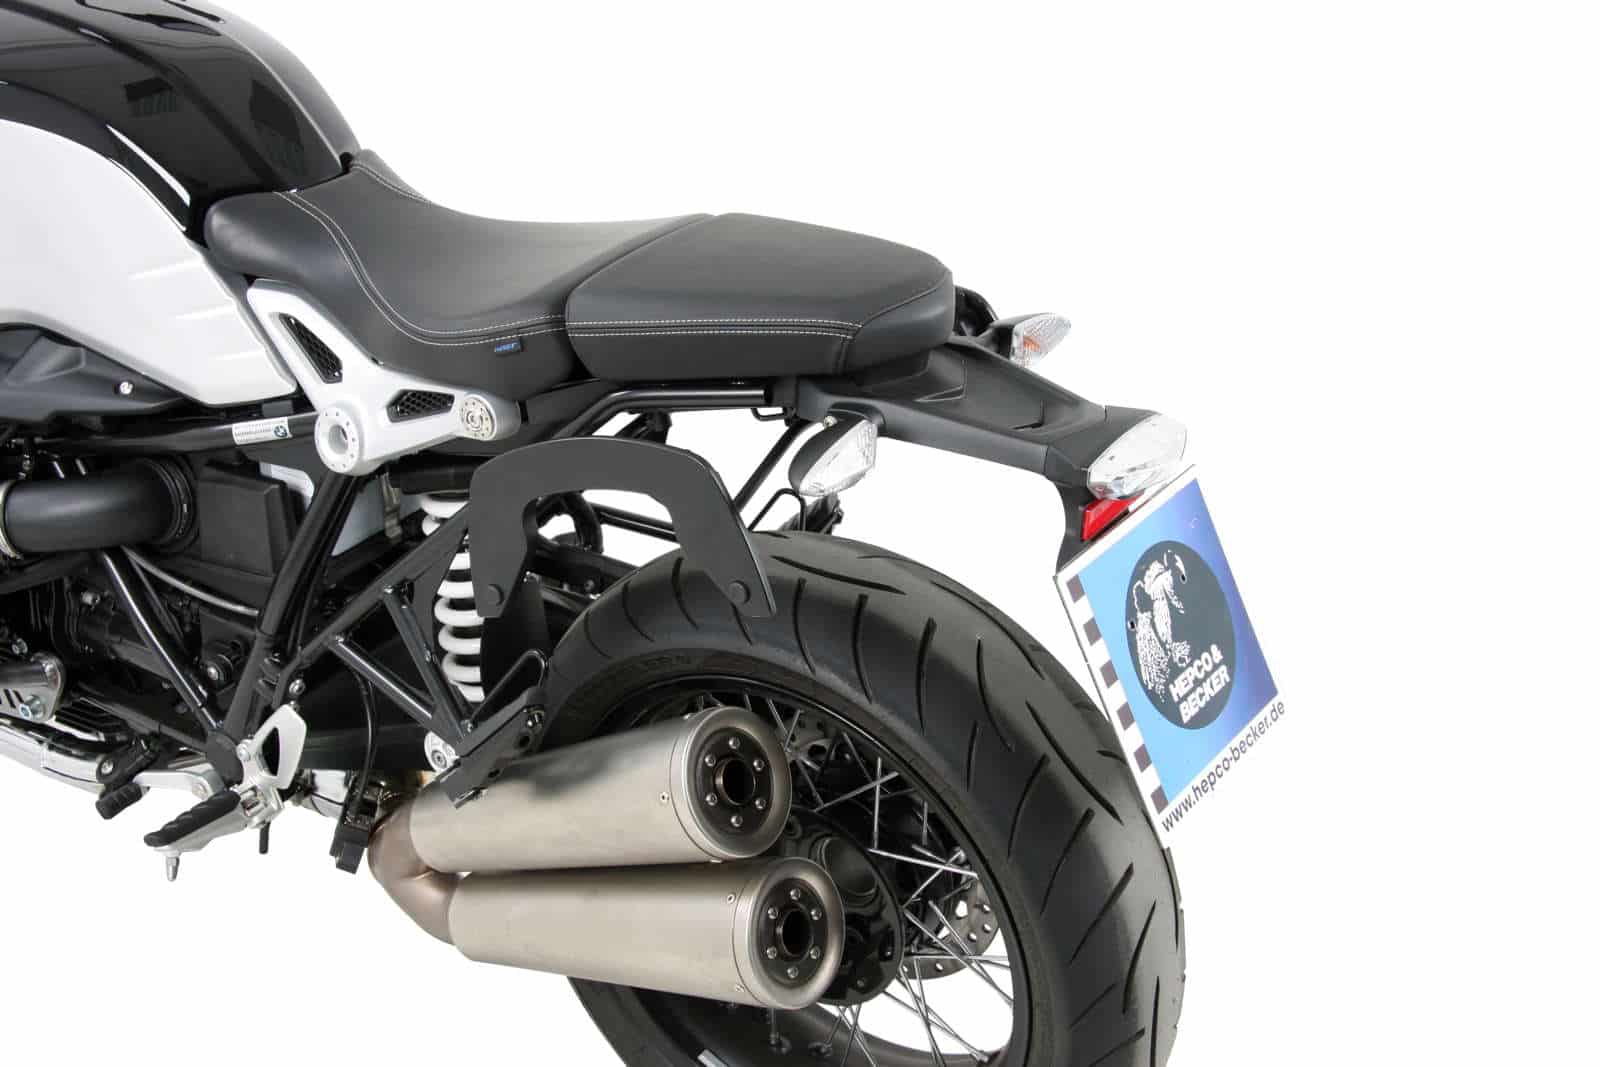 C-Bow sidecarrier for BMW R nineT (2014-)